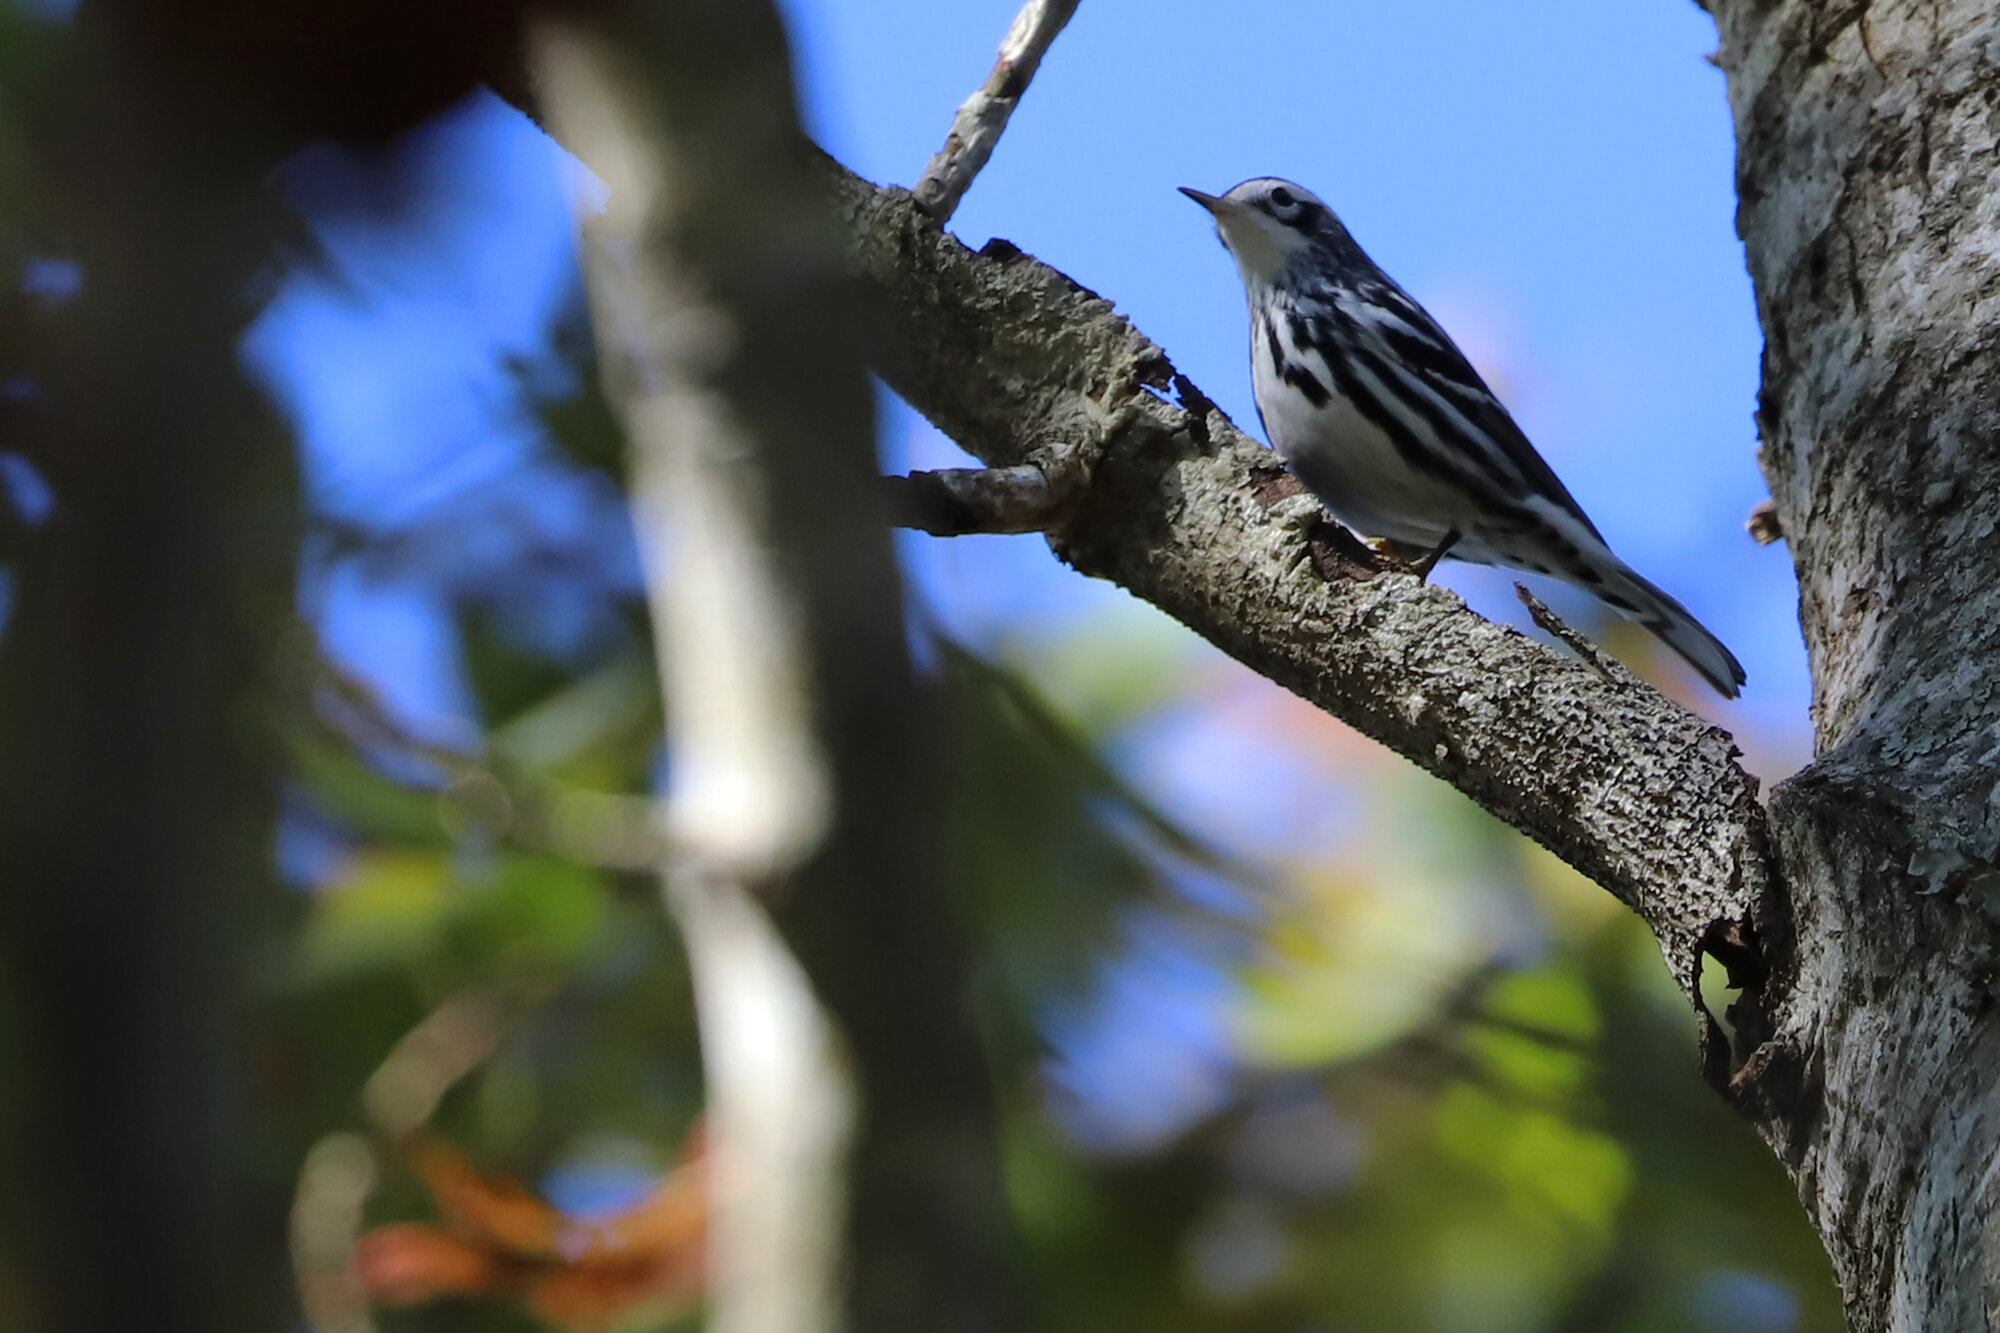  Black-and-white Warbler / Kings Grant Rd. / 23 Oct 